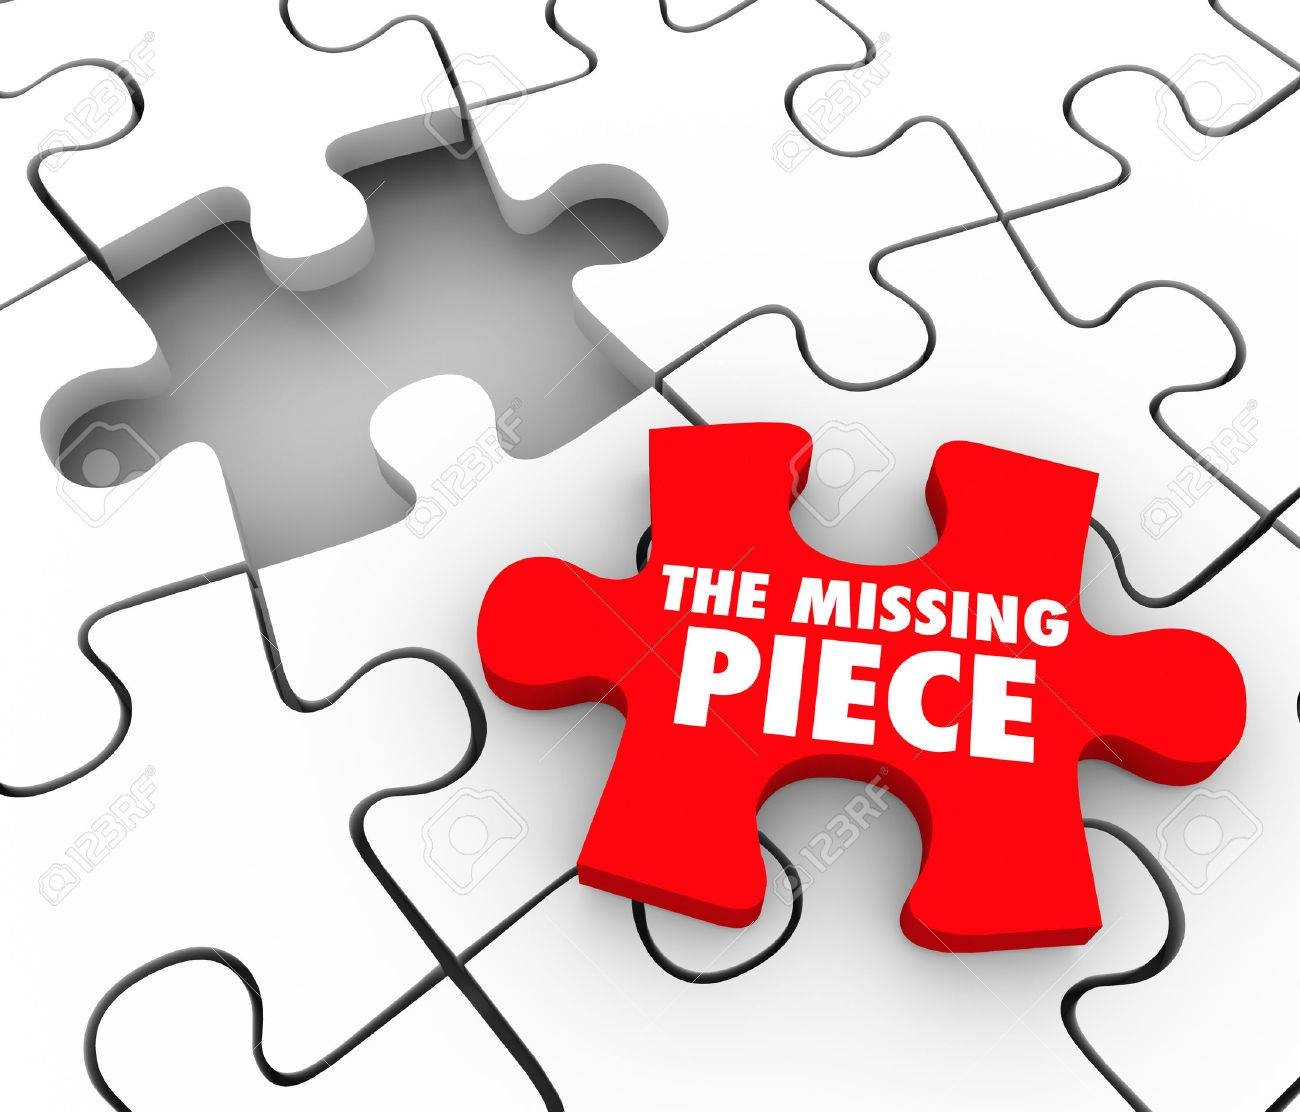 The Missing Piece Words On A Red Puzzle Piece To Complete A Puzzle - Print Missing Puzzle Piece